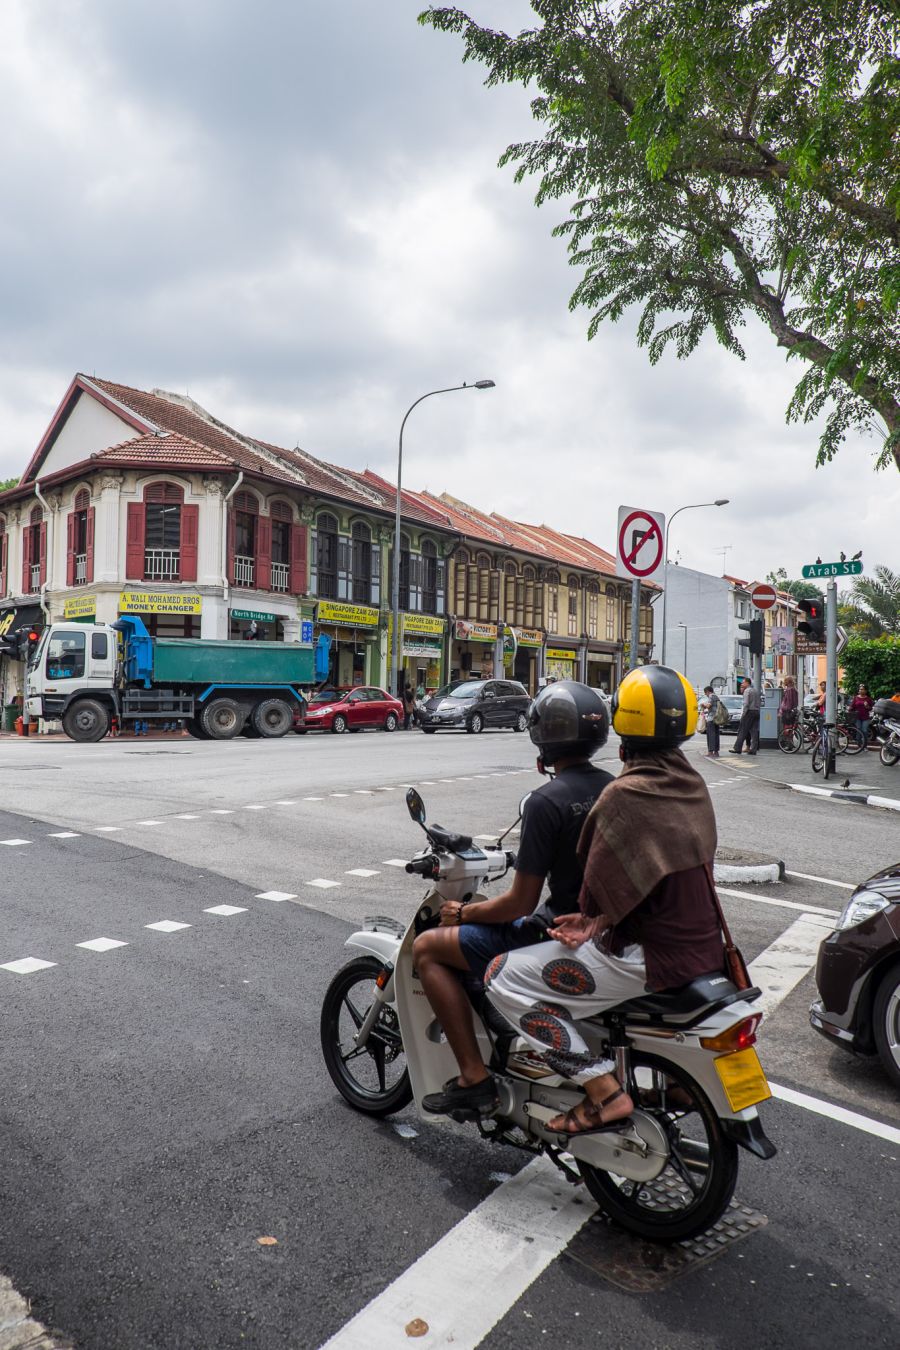 We walked along Arab Street and crossed at these traffic lights many times during our stay